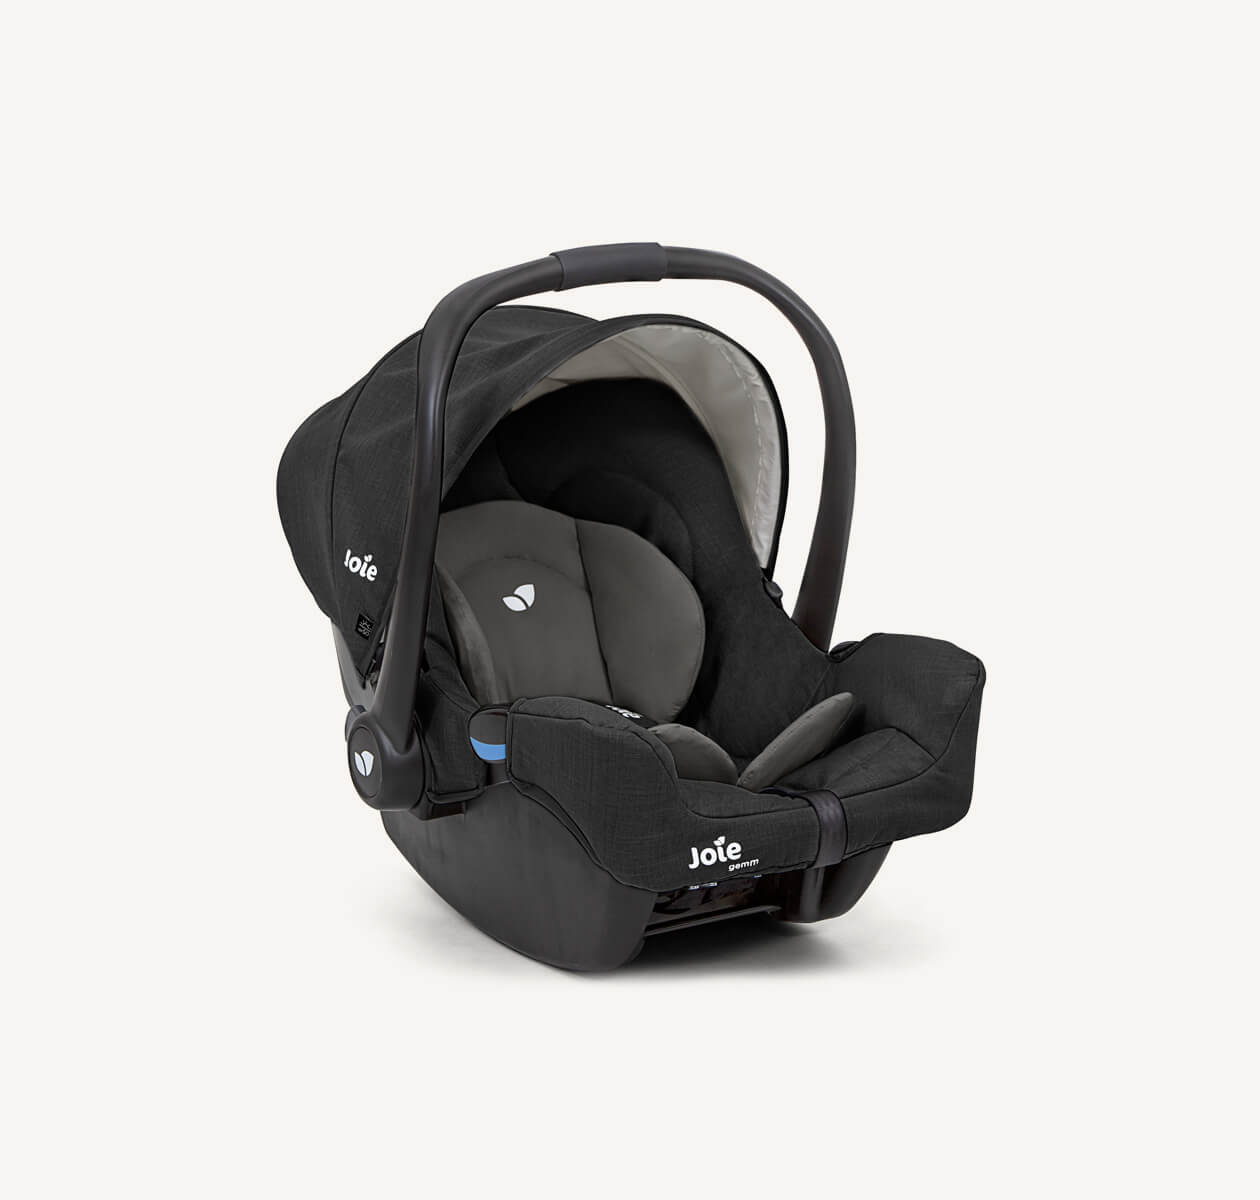 https://dd.joiebaby.com/media/catalog/product/p/1/p1-joie-baby-car-seat-gemm-shale-right-angle_1_1.jpg?type=product&height=265&width=265